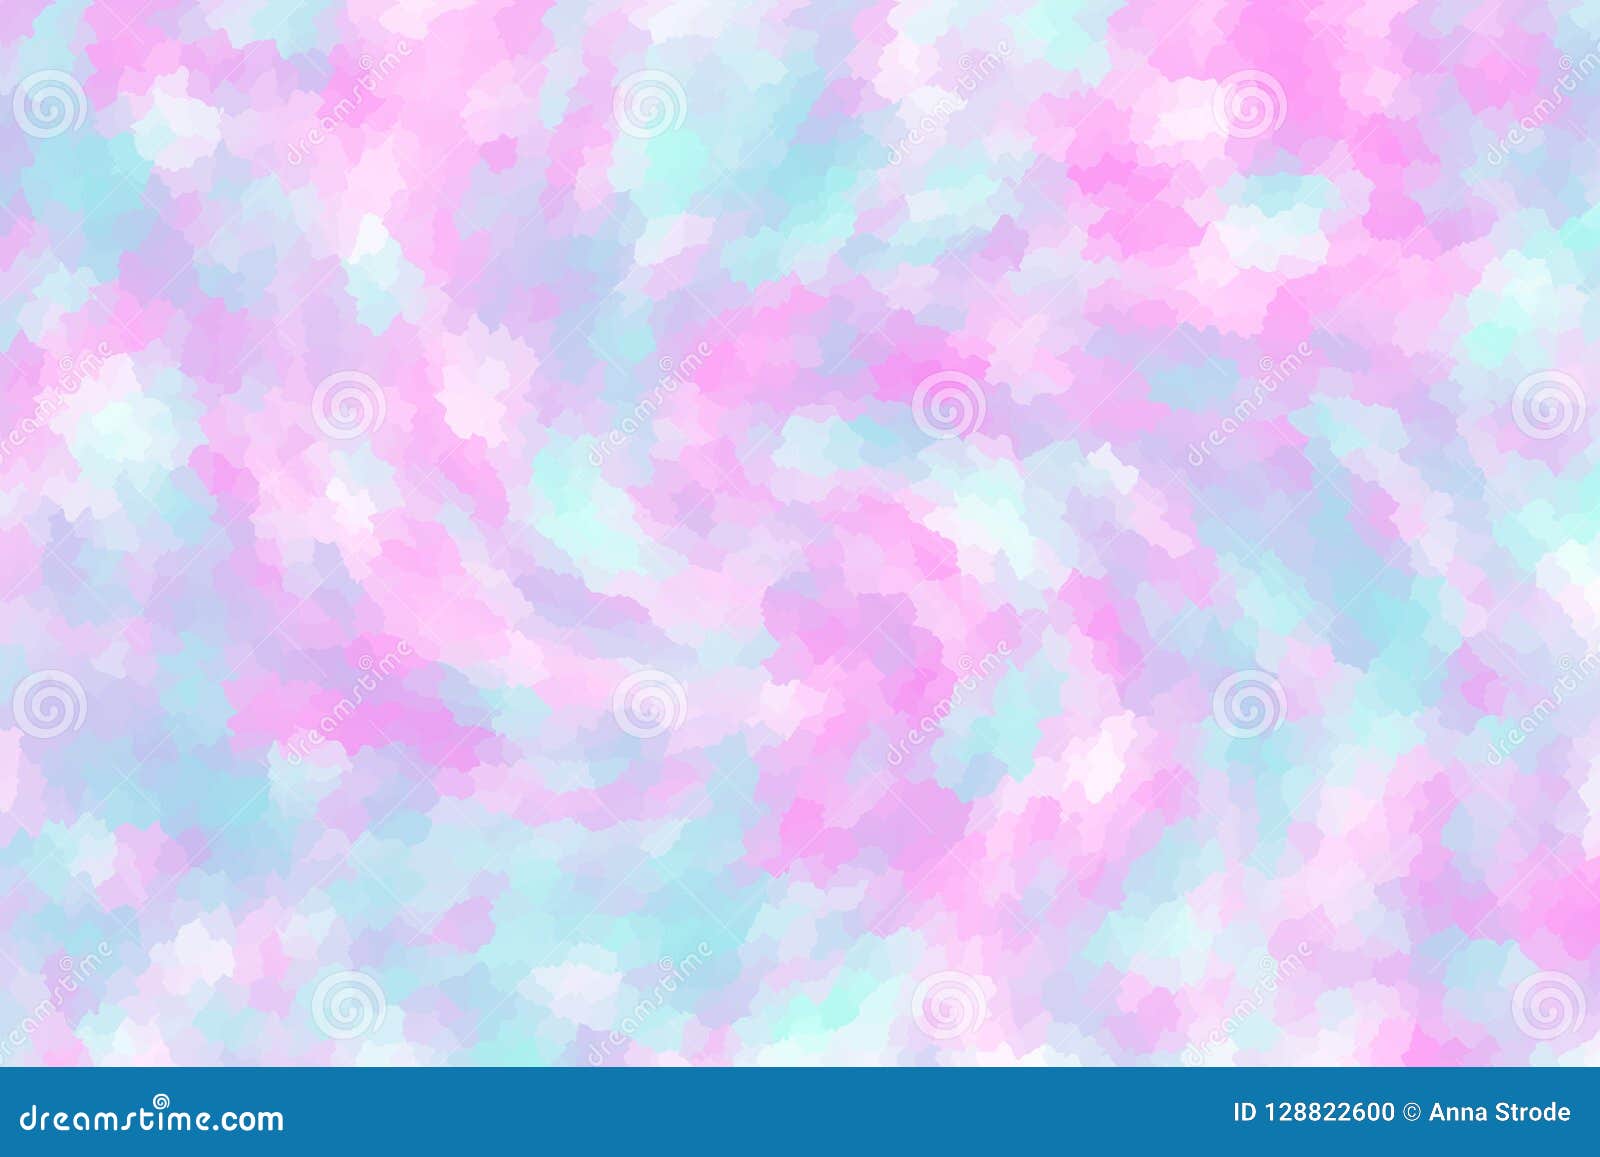 Background In Pastel Colors Pink And Light Blue Stock